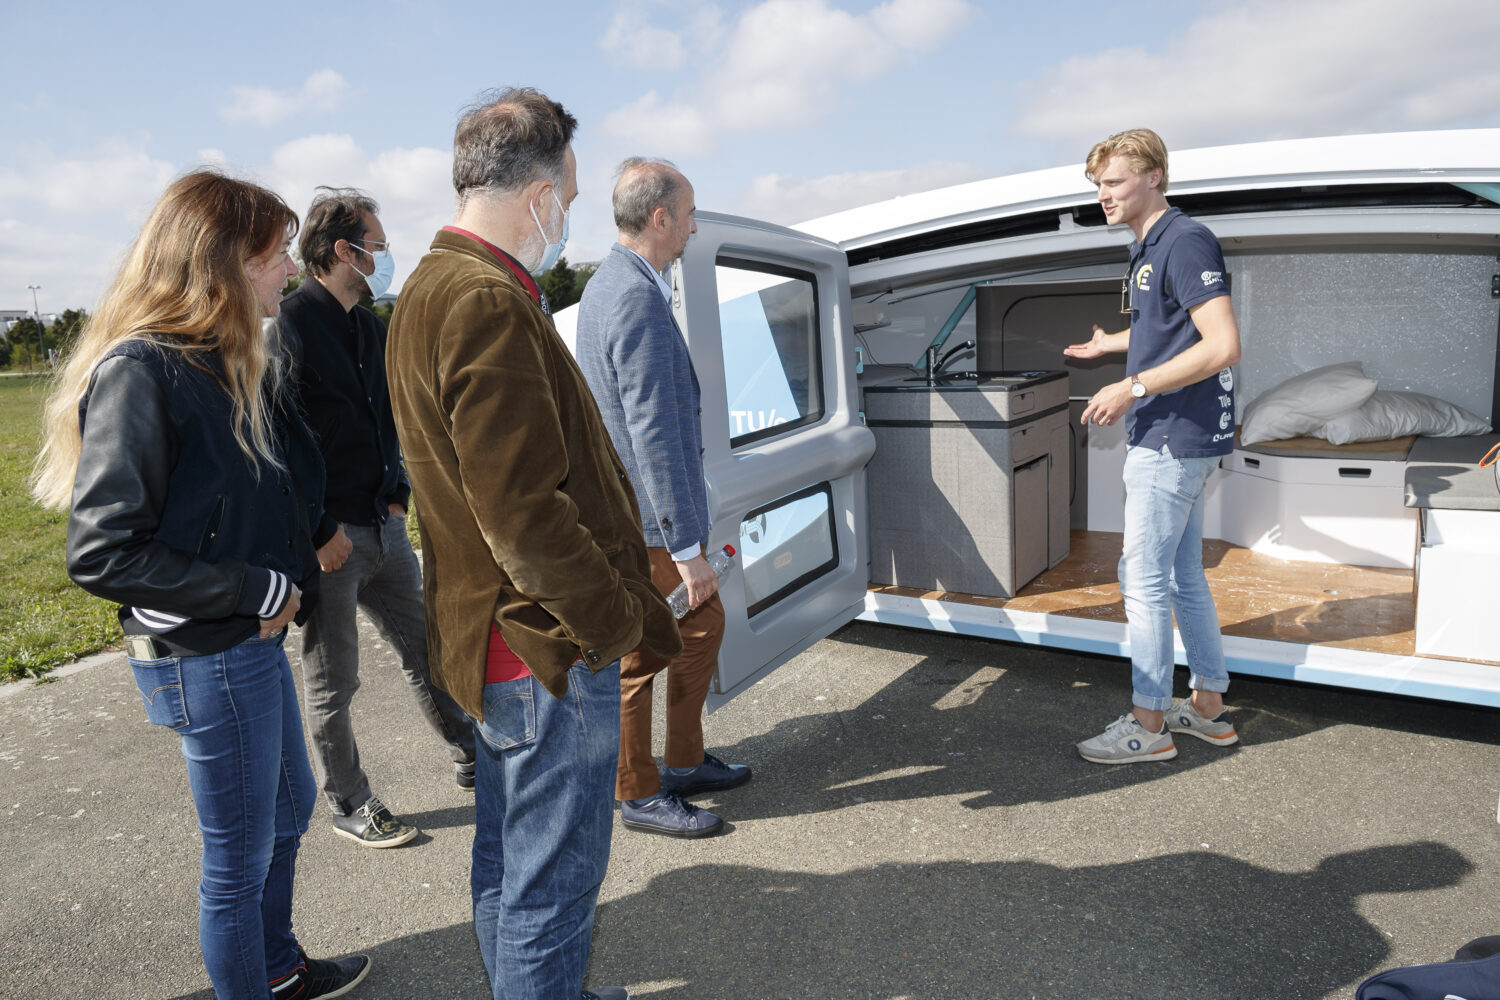 2021 - Story Mobilize - Stella Vita, a prototype solar-powered house on wheels inspiring Mobilize